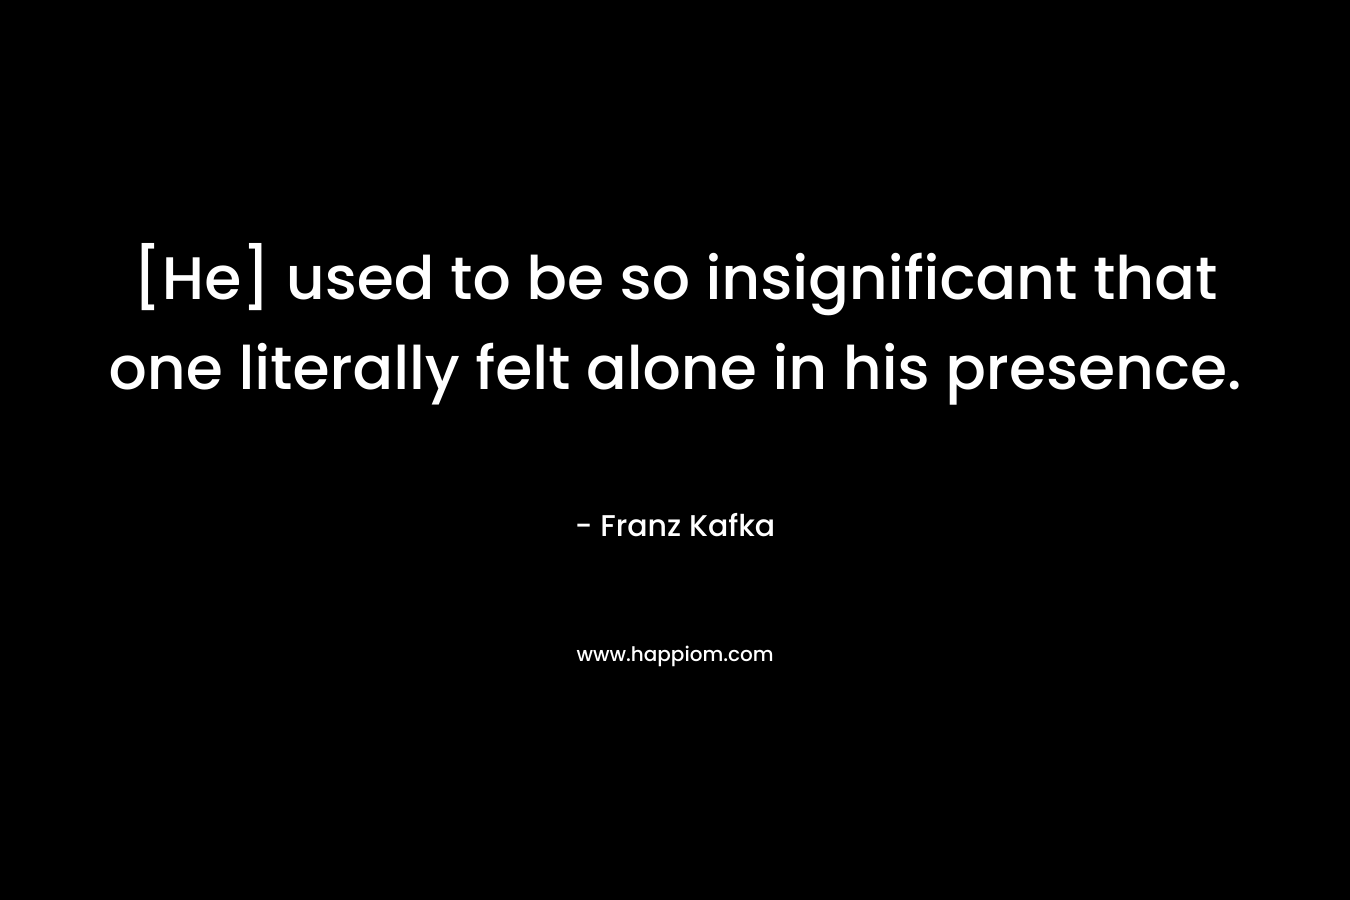 [He] used to be so insignificant that one literally felt alone in his presence.